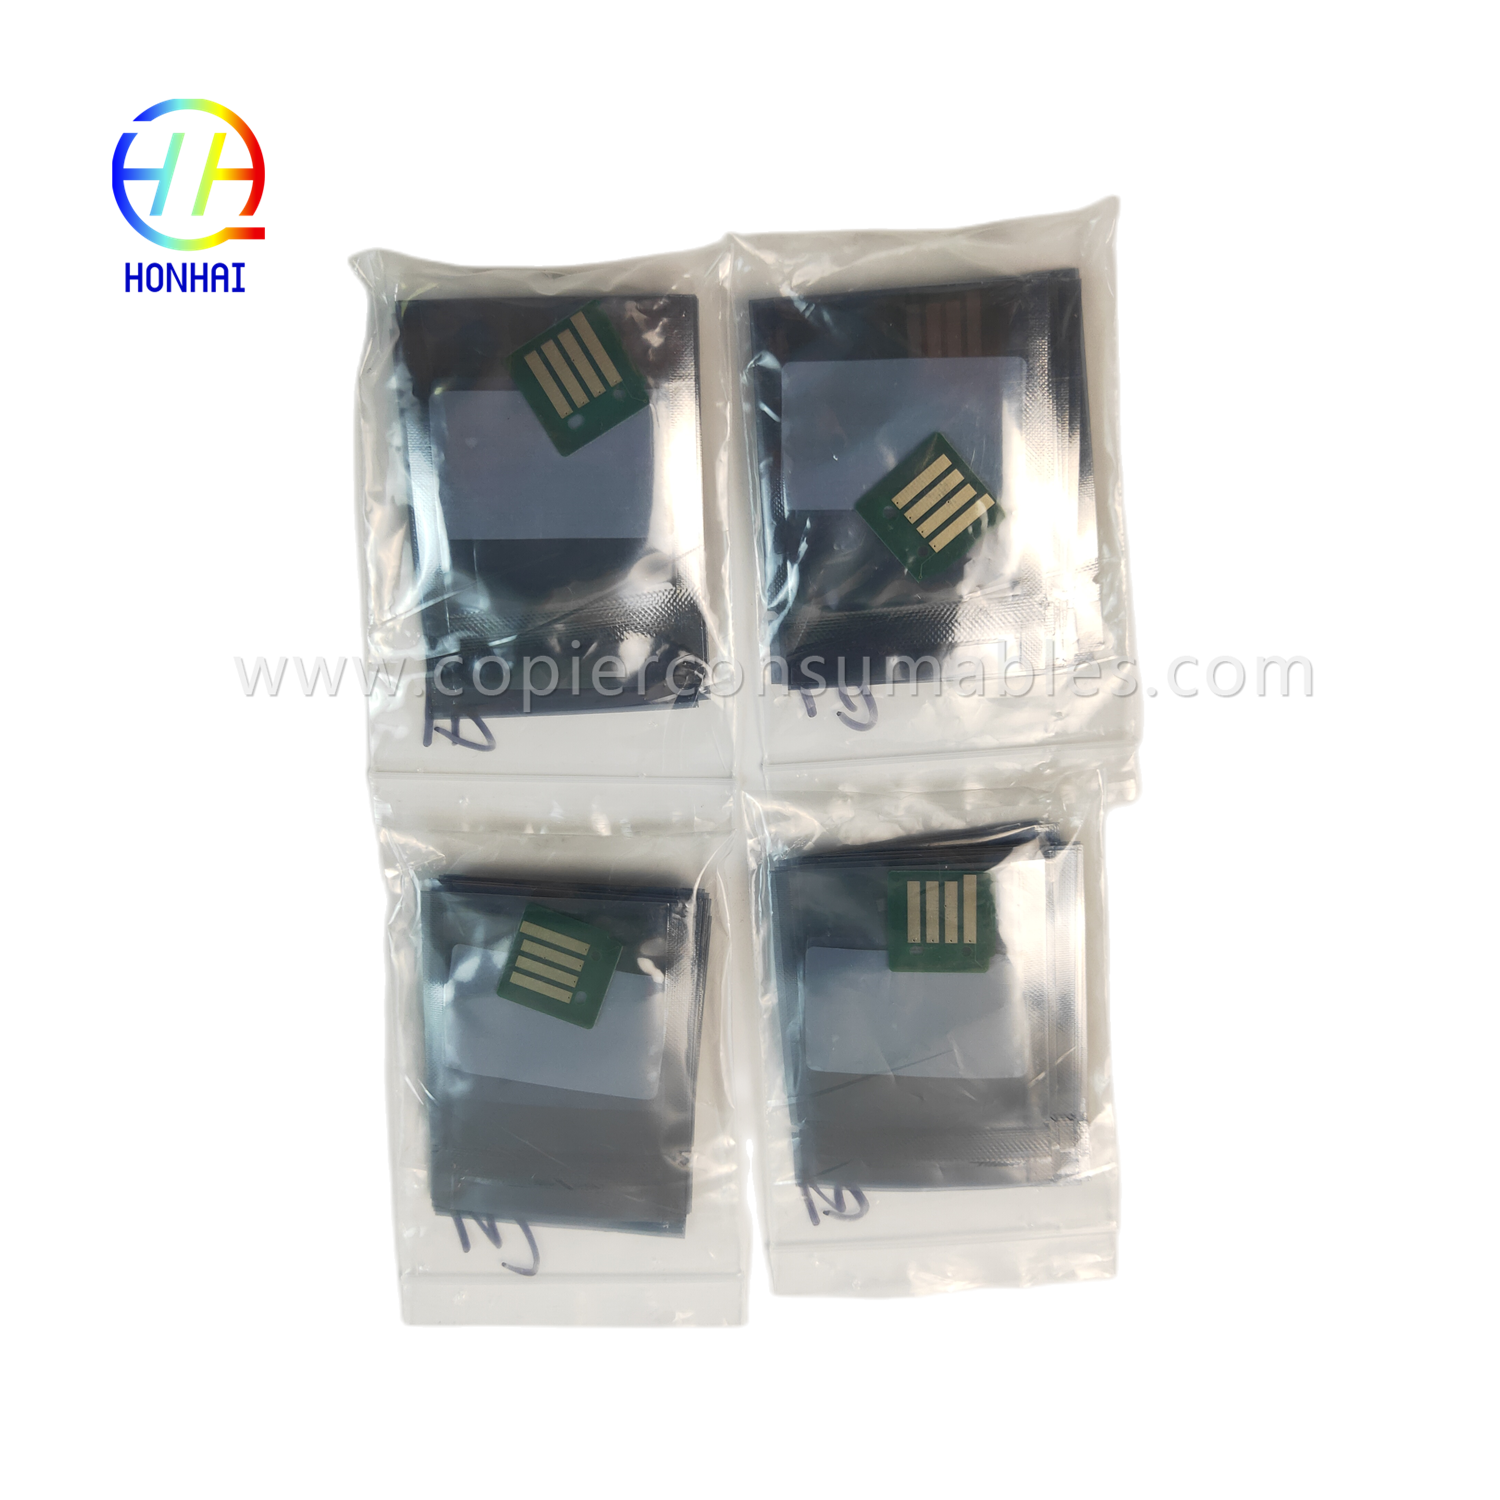 https://c585.goodao.net/oner-chipset-for-xerox-altalink-c8030-c8035-c8055-c8045-006r01701-006r01702-006r01703-006r01704-chip-product/chi